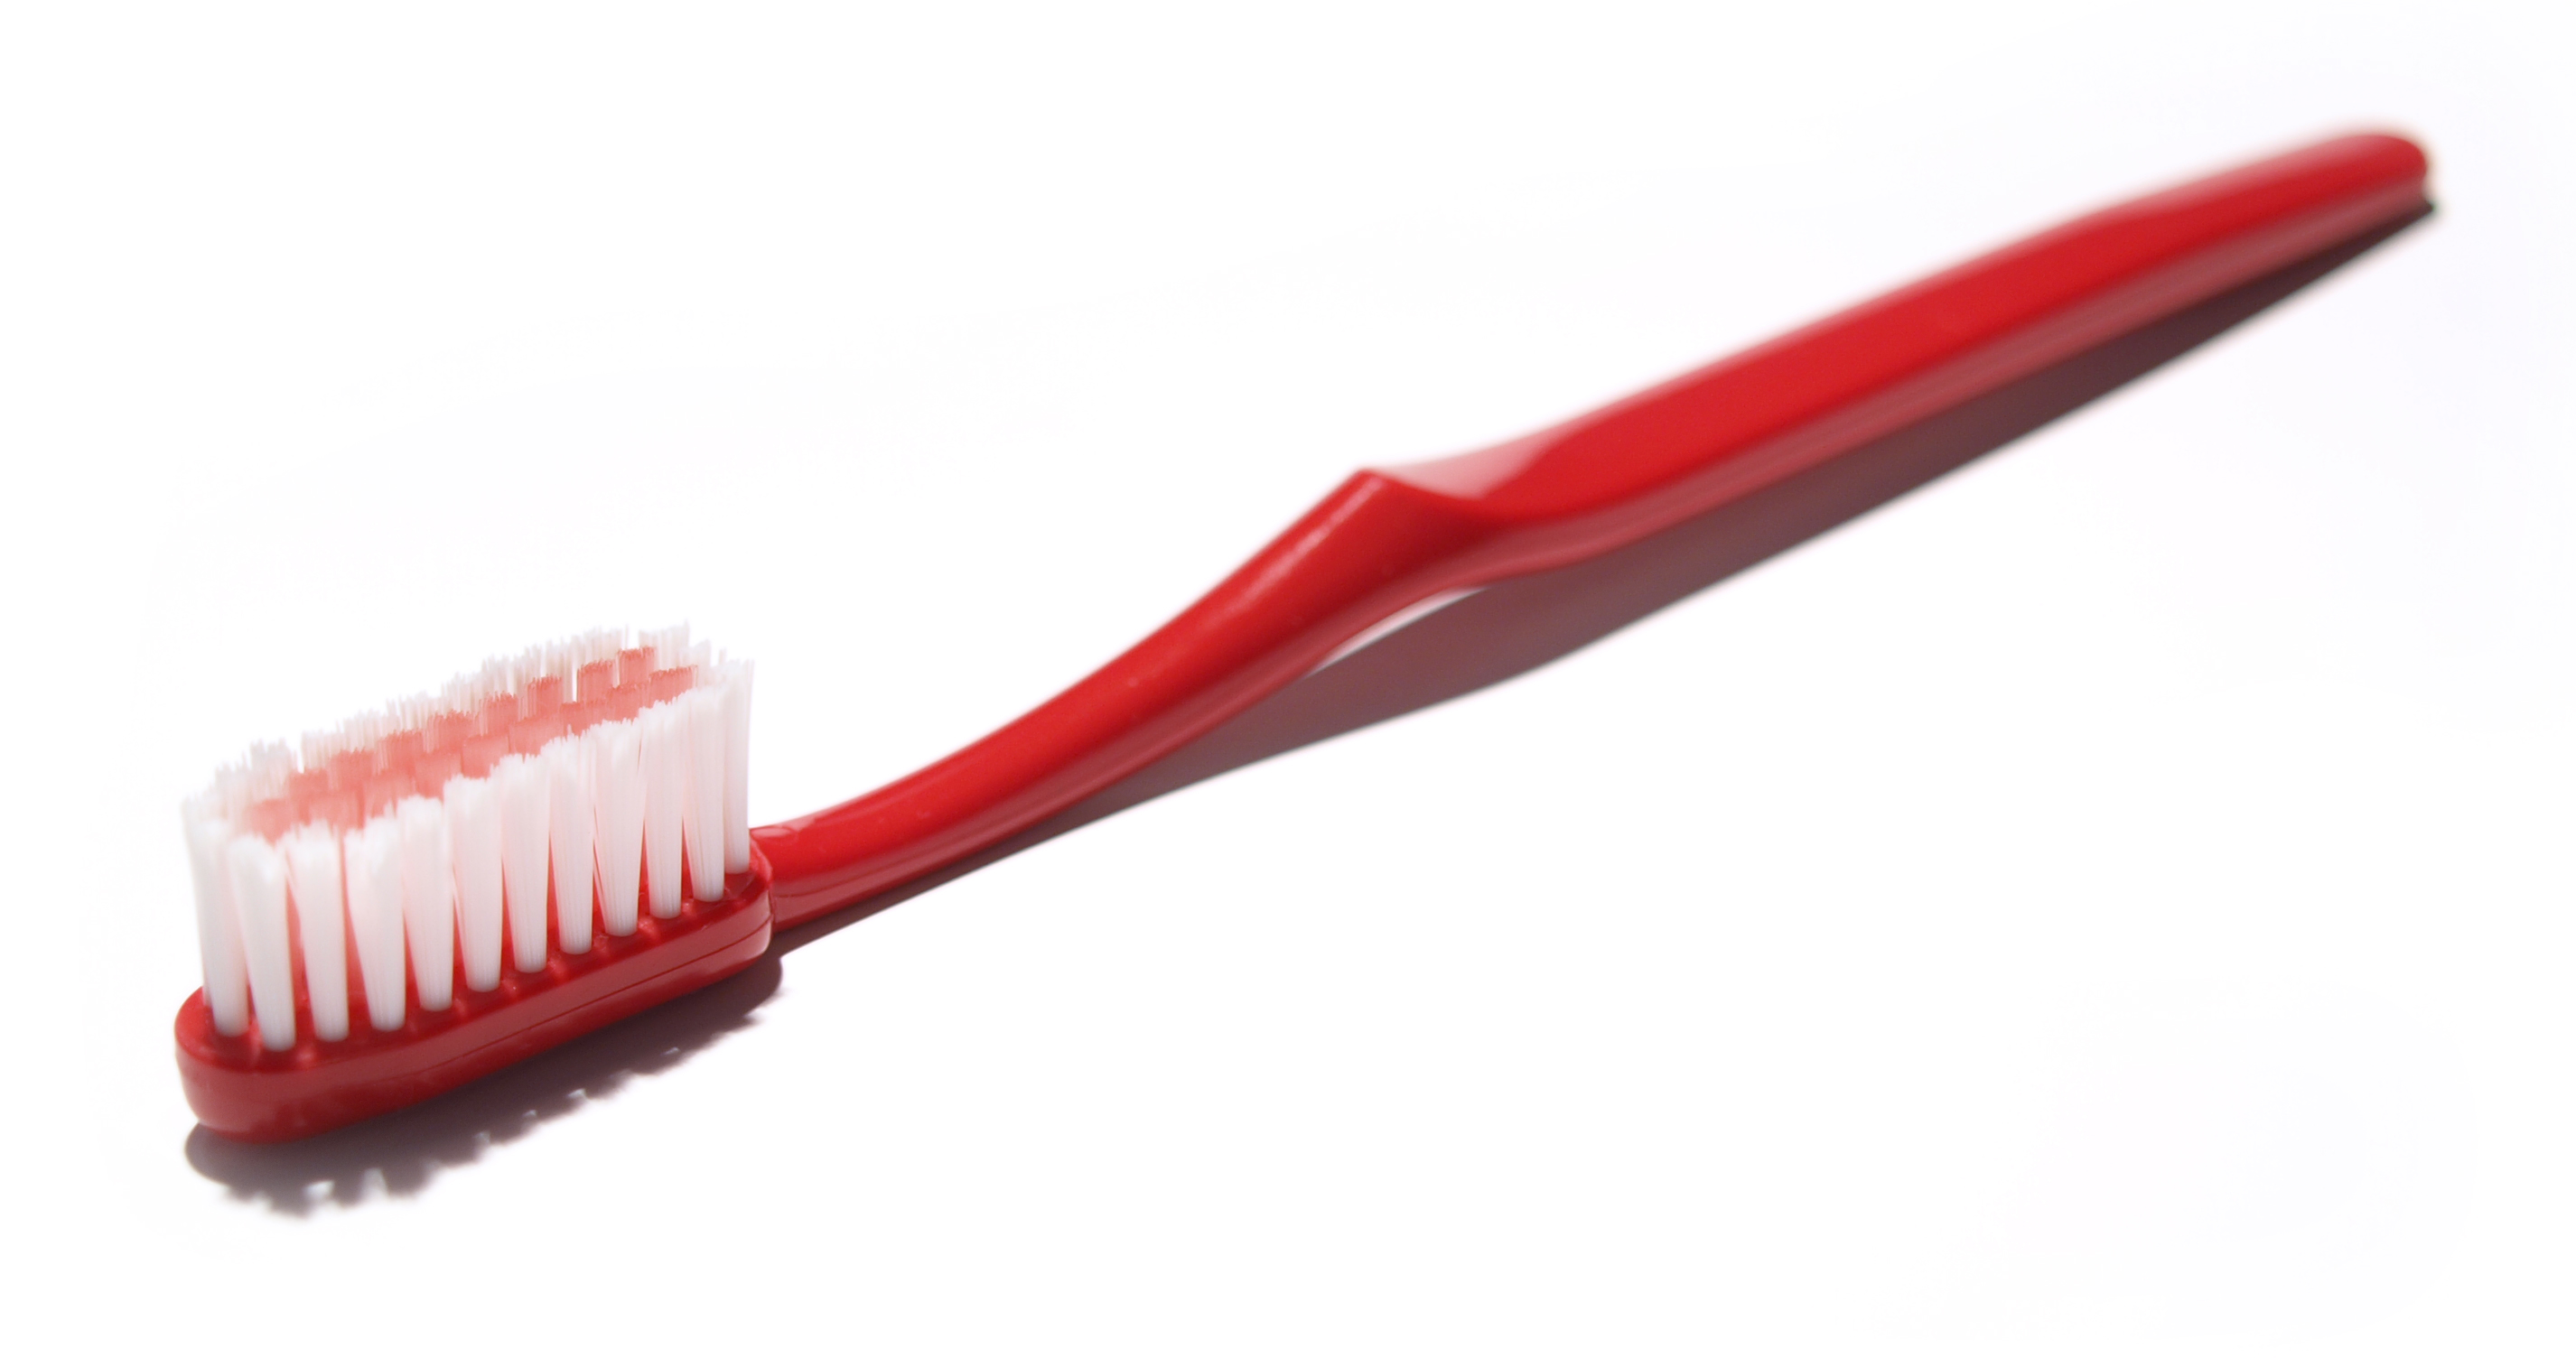 10 Fashionable Uses For An Old Toothbrush | Tracey Evelyn, Inc